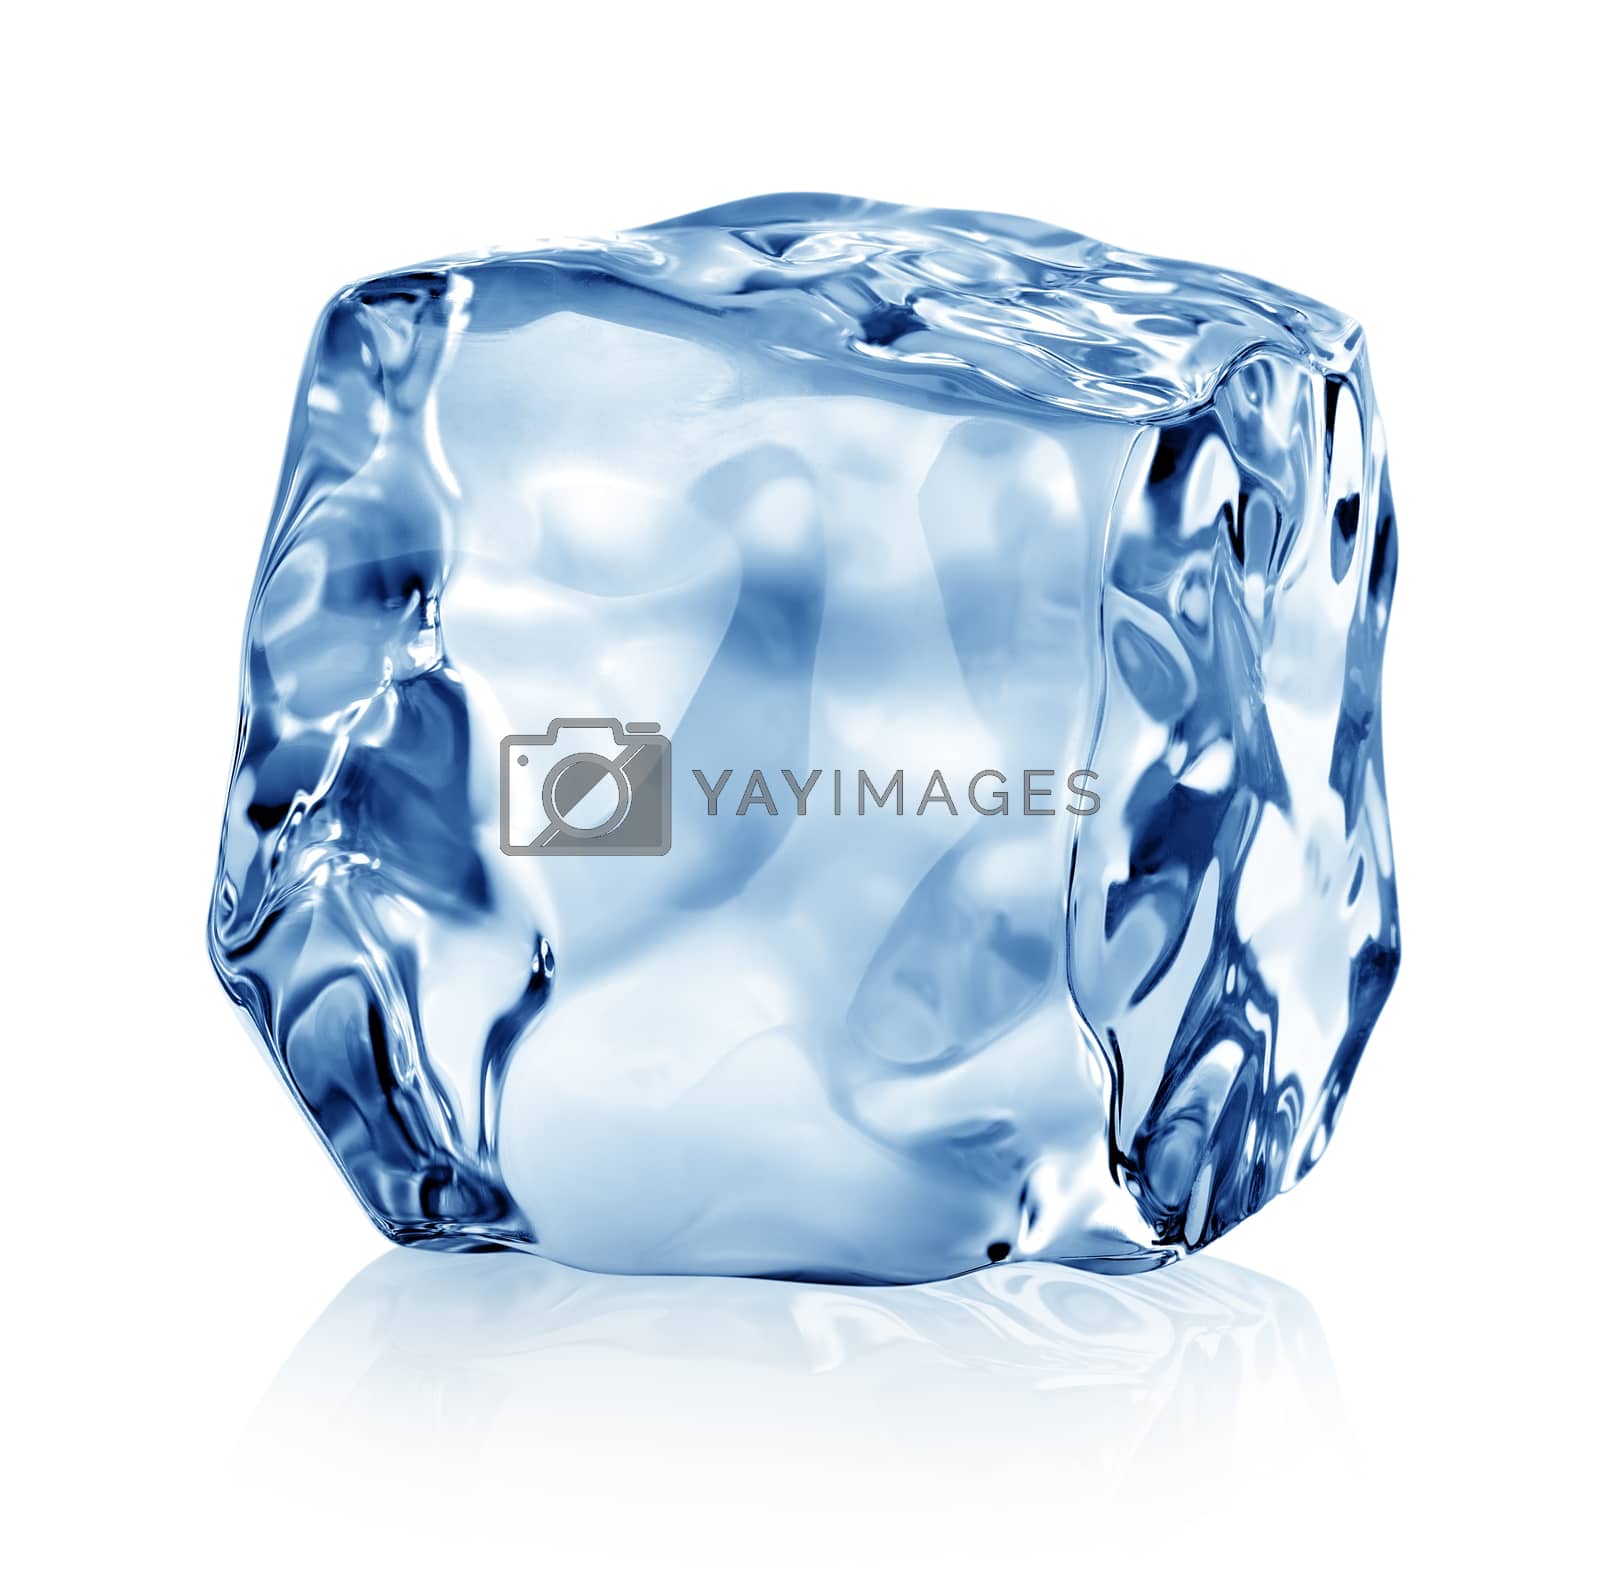 Royalty free image of Cube of blue ice by Givaga